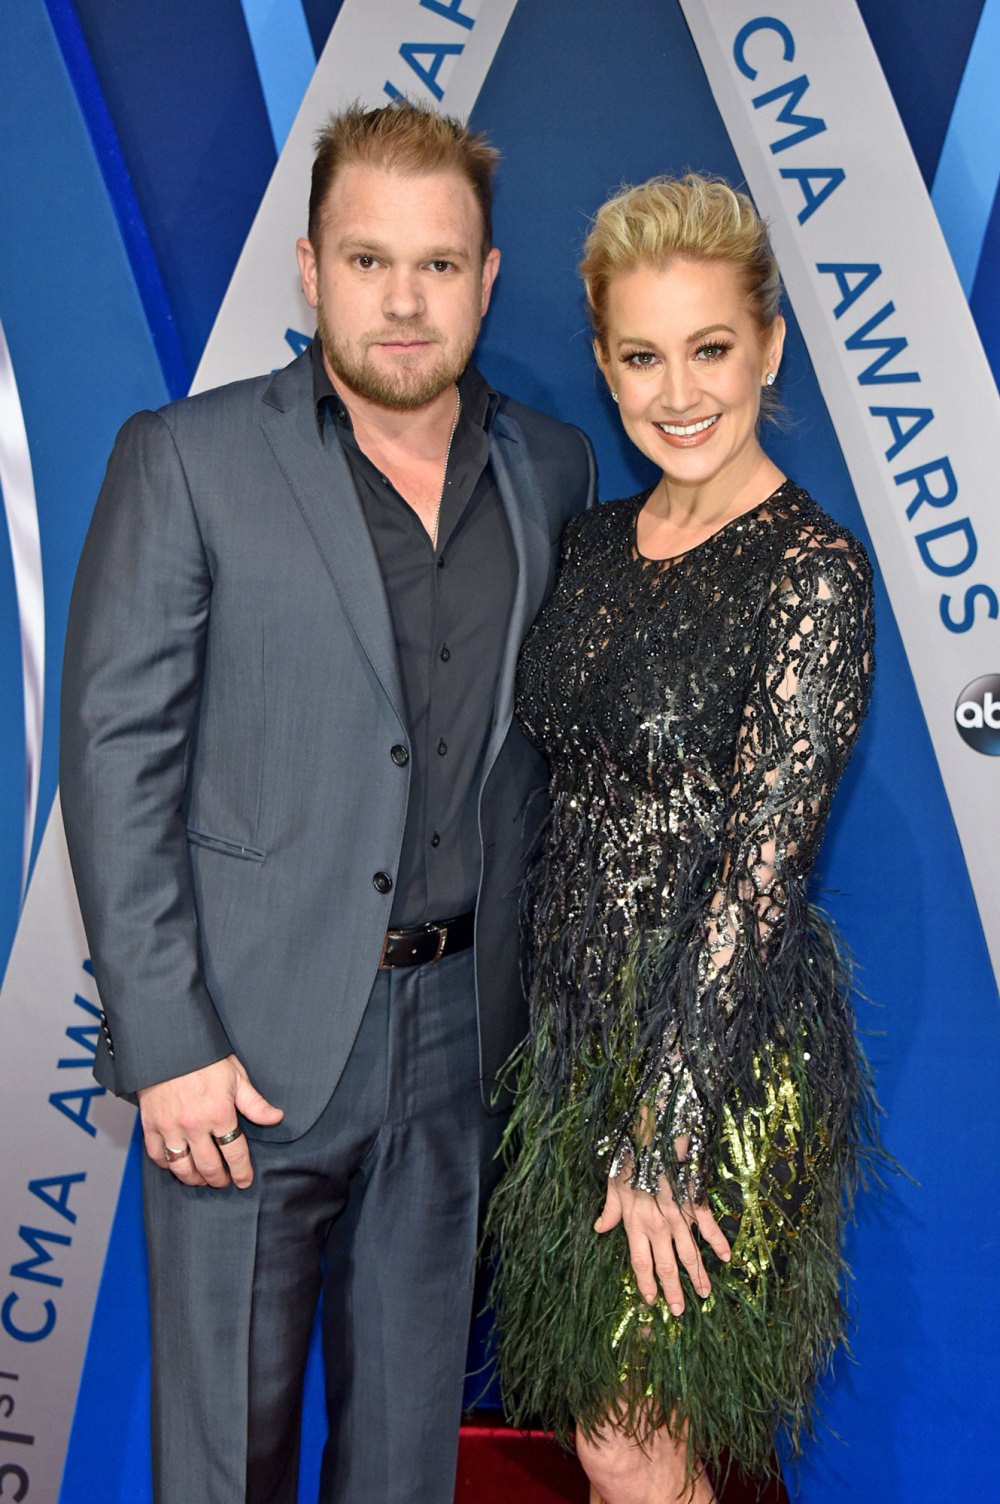 Kellie Pickler Late Husband Kyle Jacobs Is Honored in Private